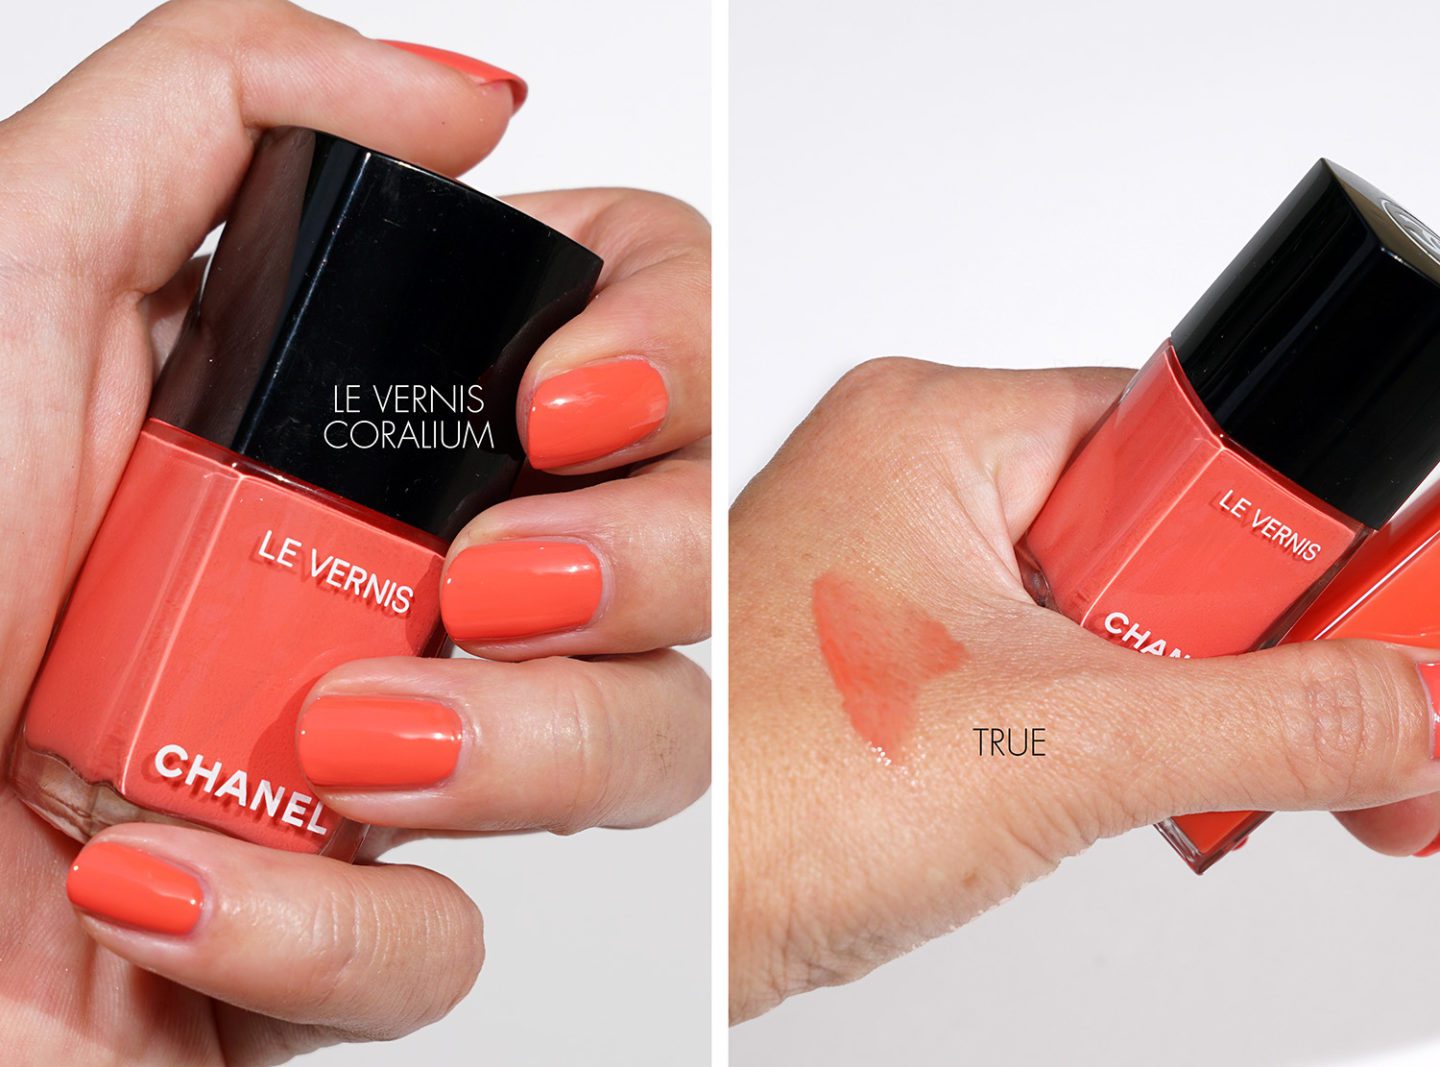 Chanel Le Vernis Coralium and Rouge Coco Gloss True swatches